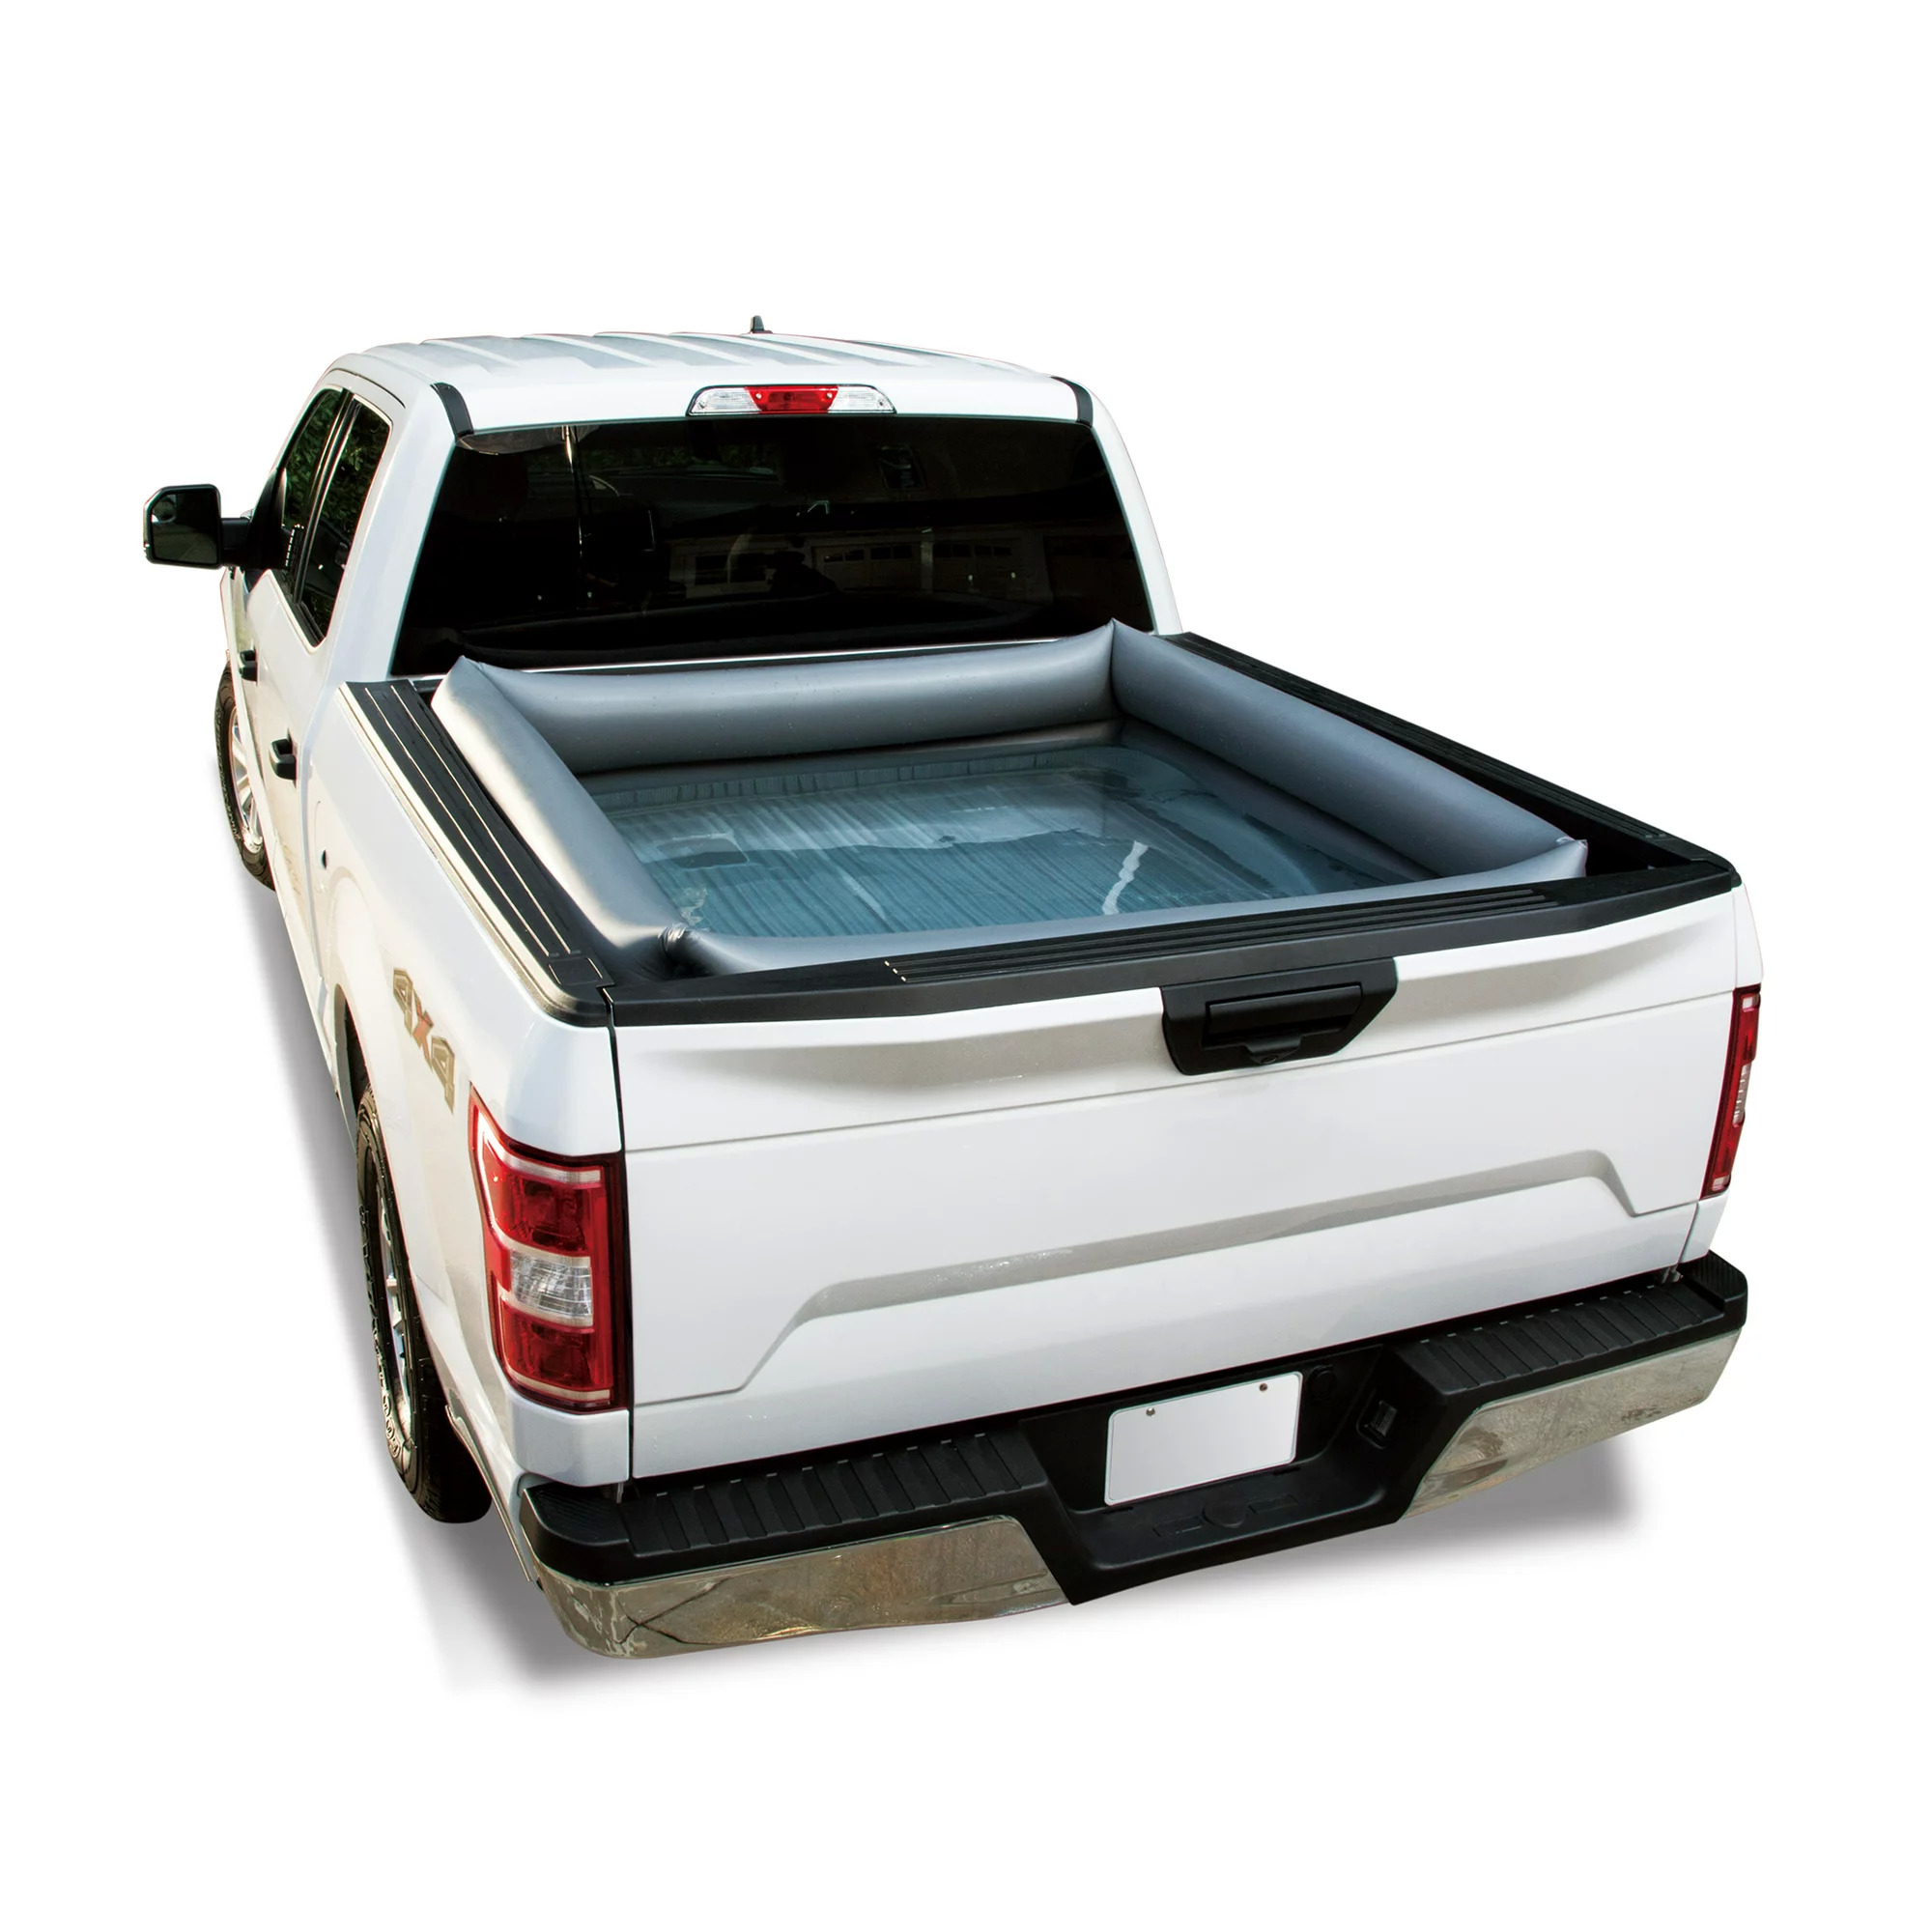 Summer Waves Rectangular Inflatable Truck Bed Pool (Gray) $29.98 + Free S&H w/ Walmart+ or $35+